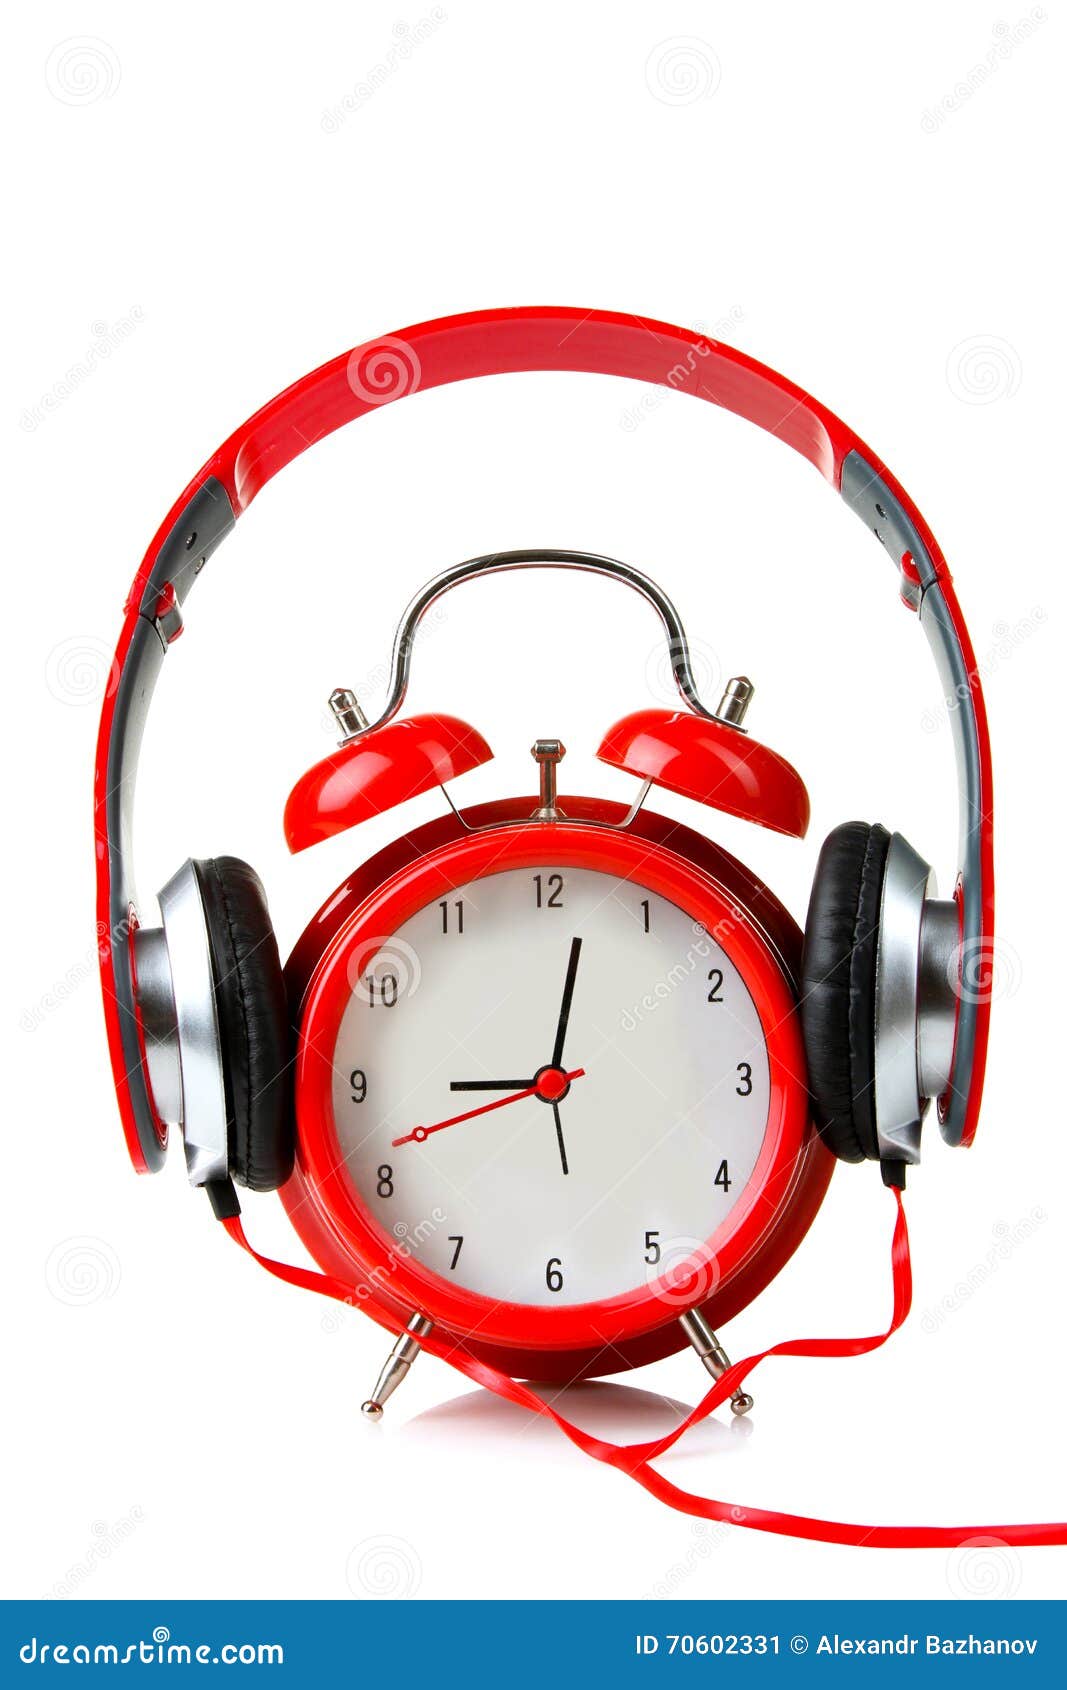 Headphones And Alarm Clock Stock Image Image Of Musical 70602331